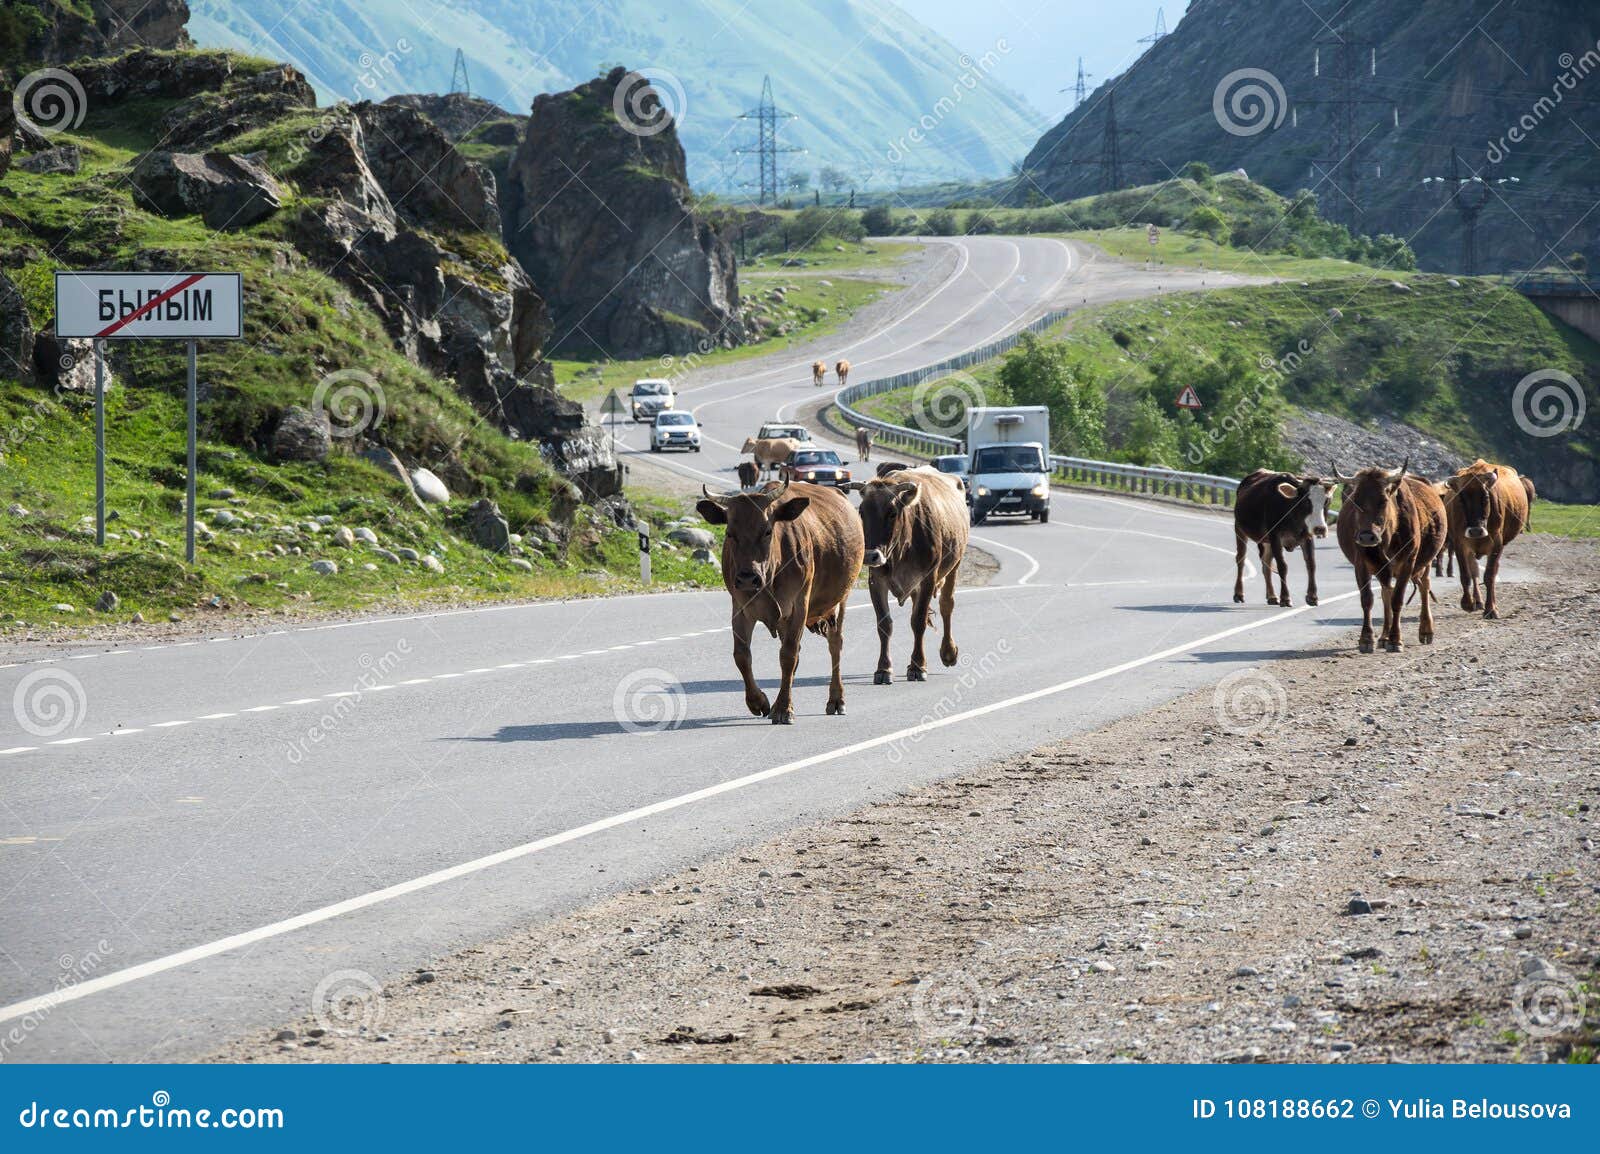 Herd Of Cows In Baksan Gorge In The Caucasus Mountains In Russia Stock